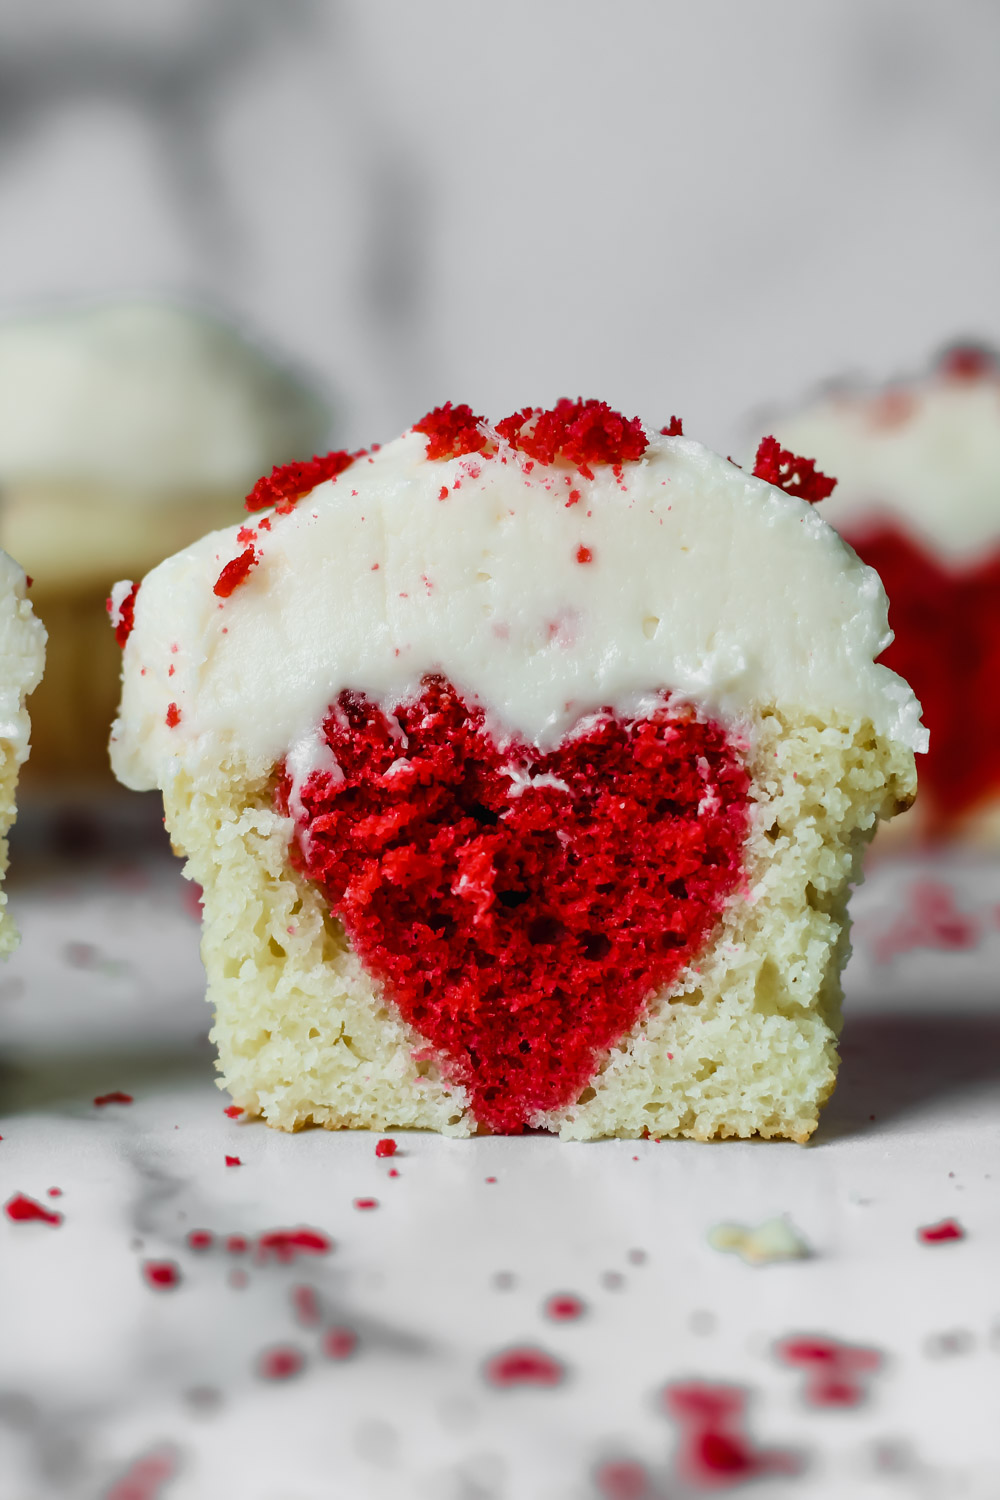 A cupcake with a heart baked inside.